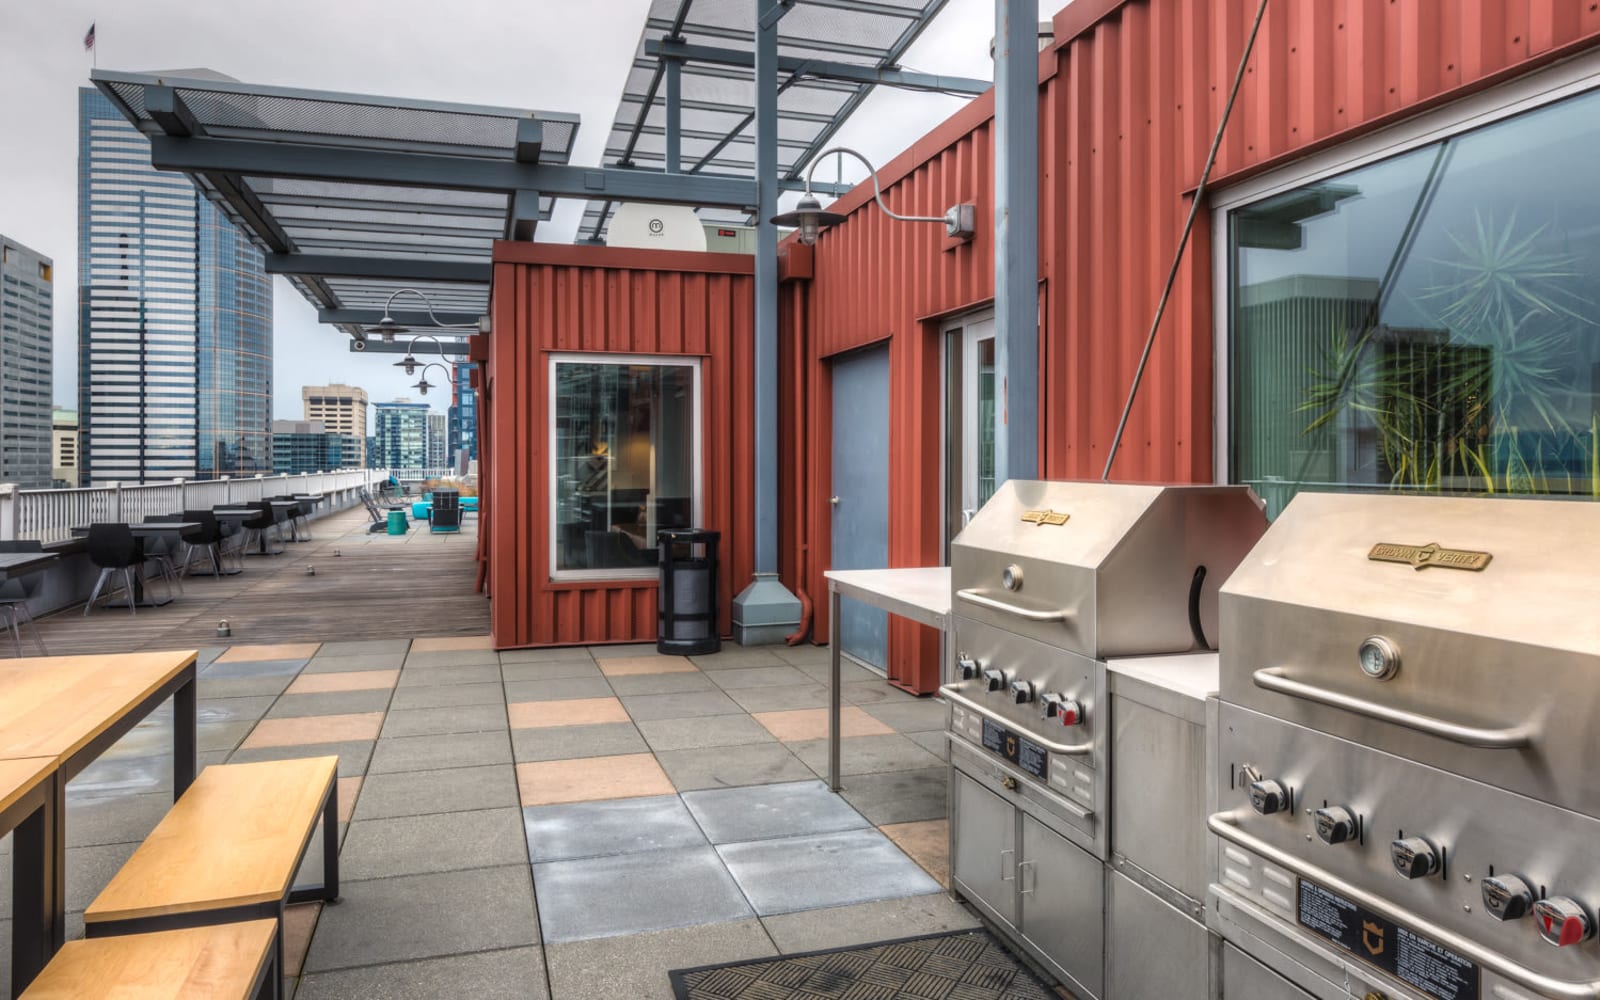 Outdoor rooftop cooking grill area at M Street in Seattle, Washington